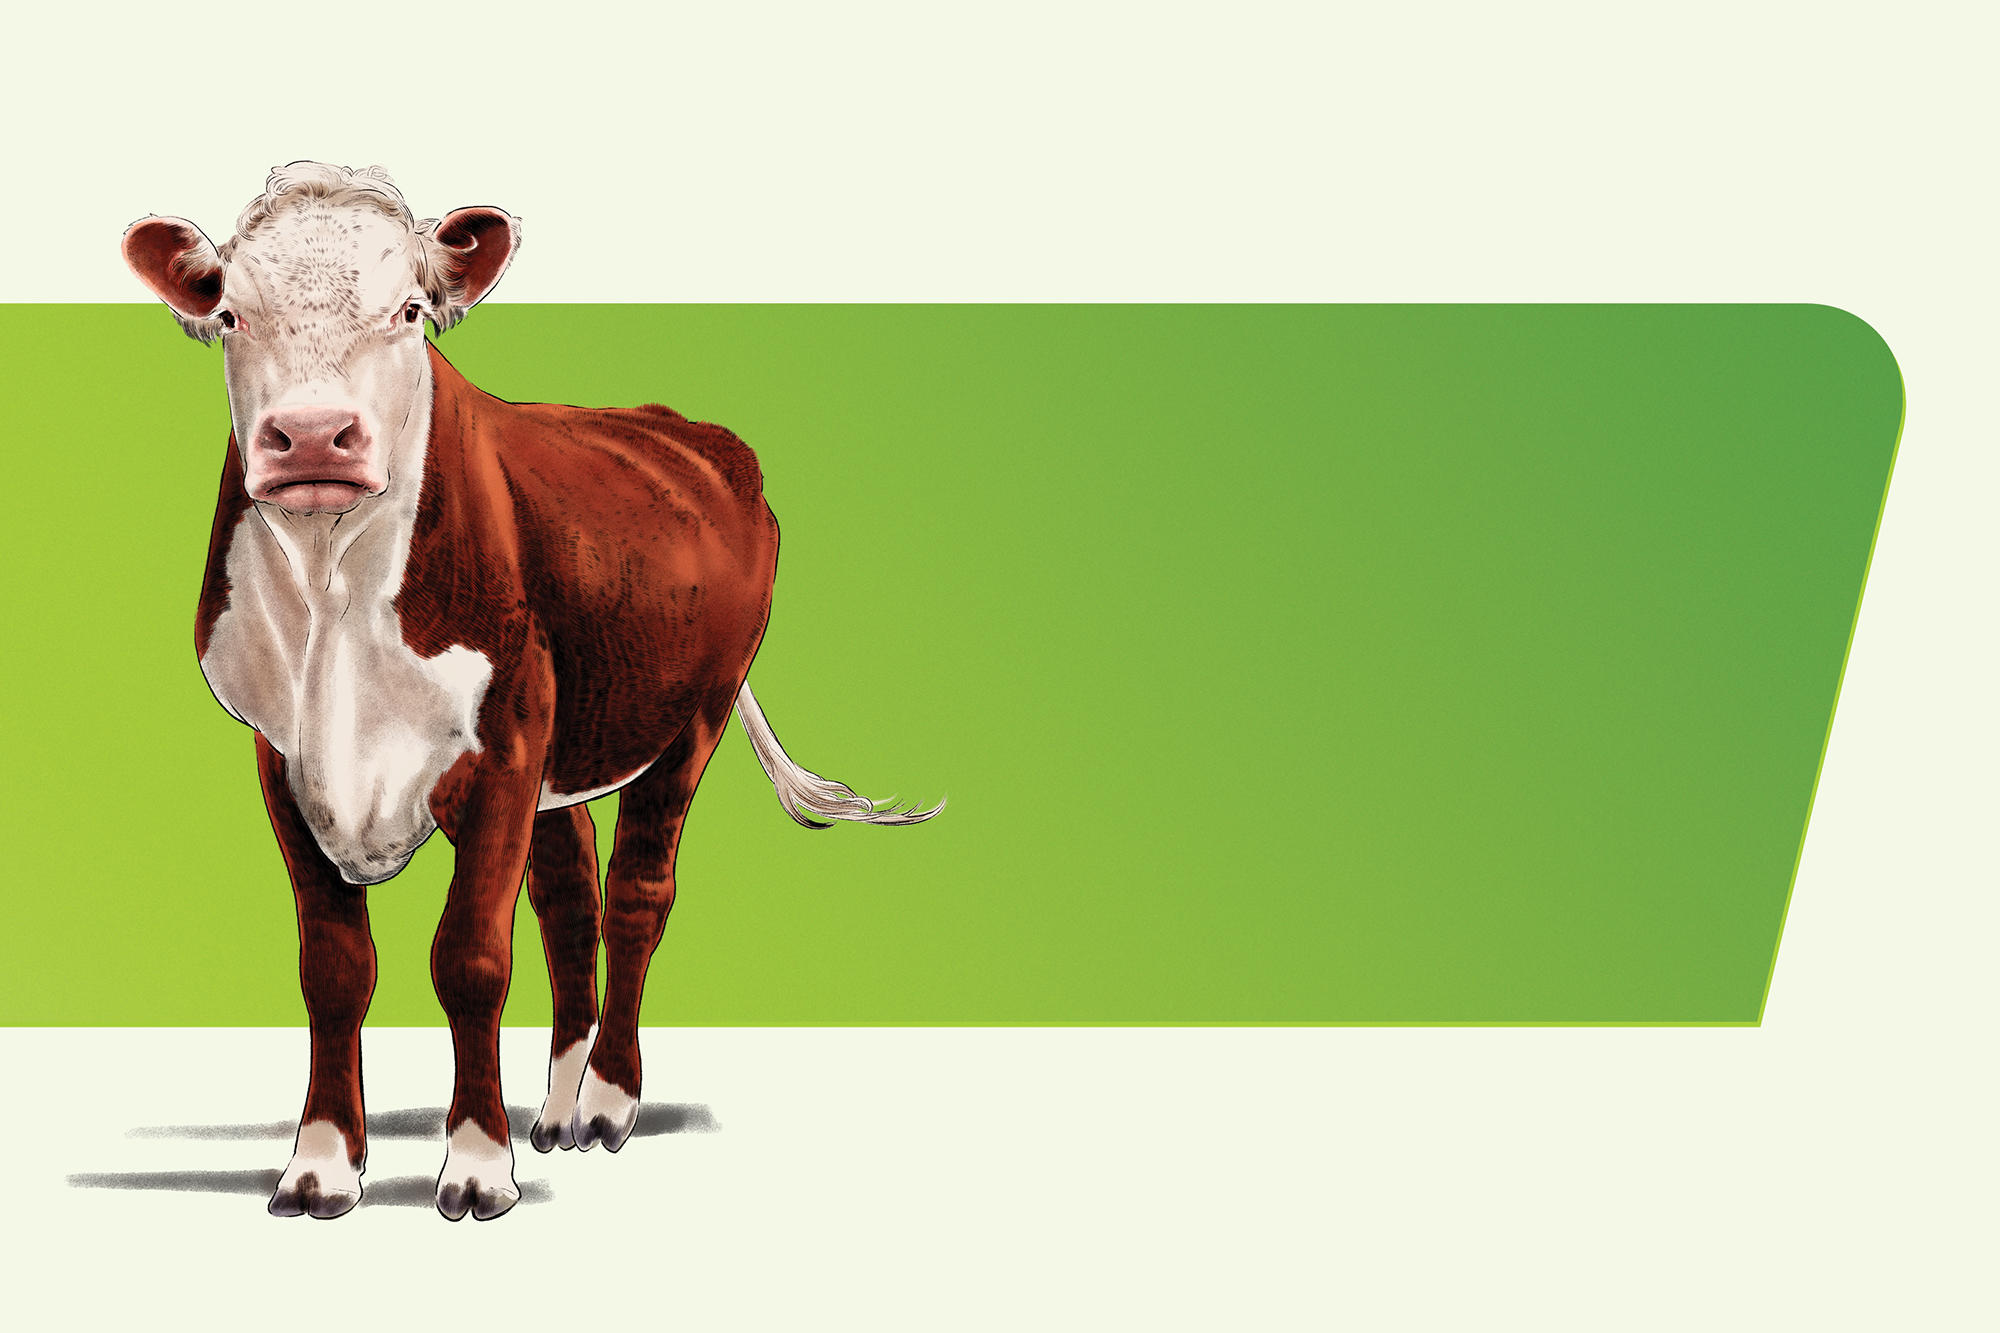 An animation of a cow that can be insured using livestock insurance.